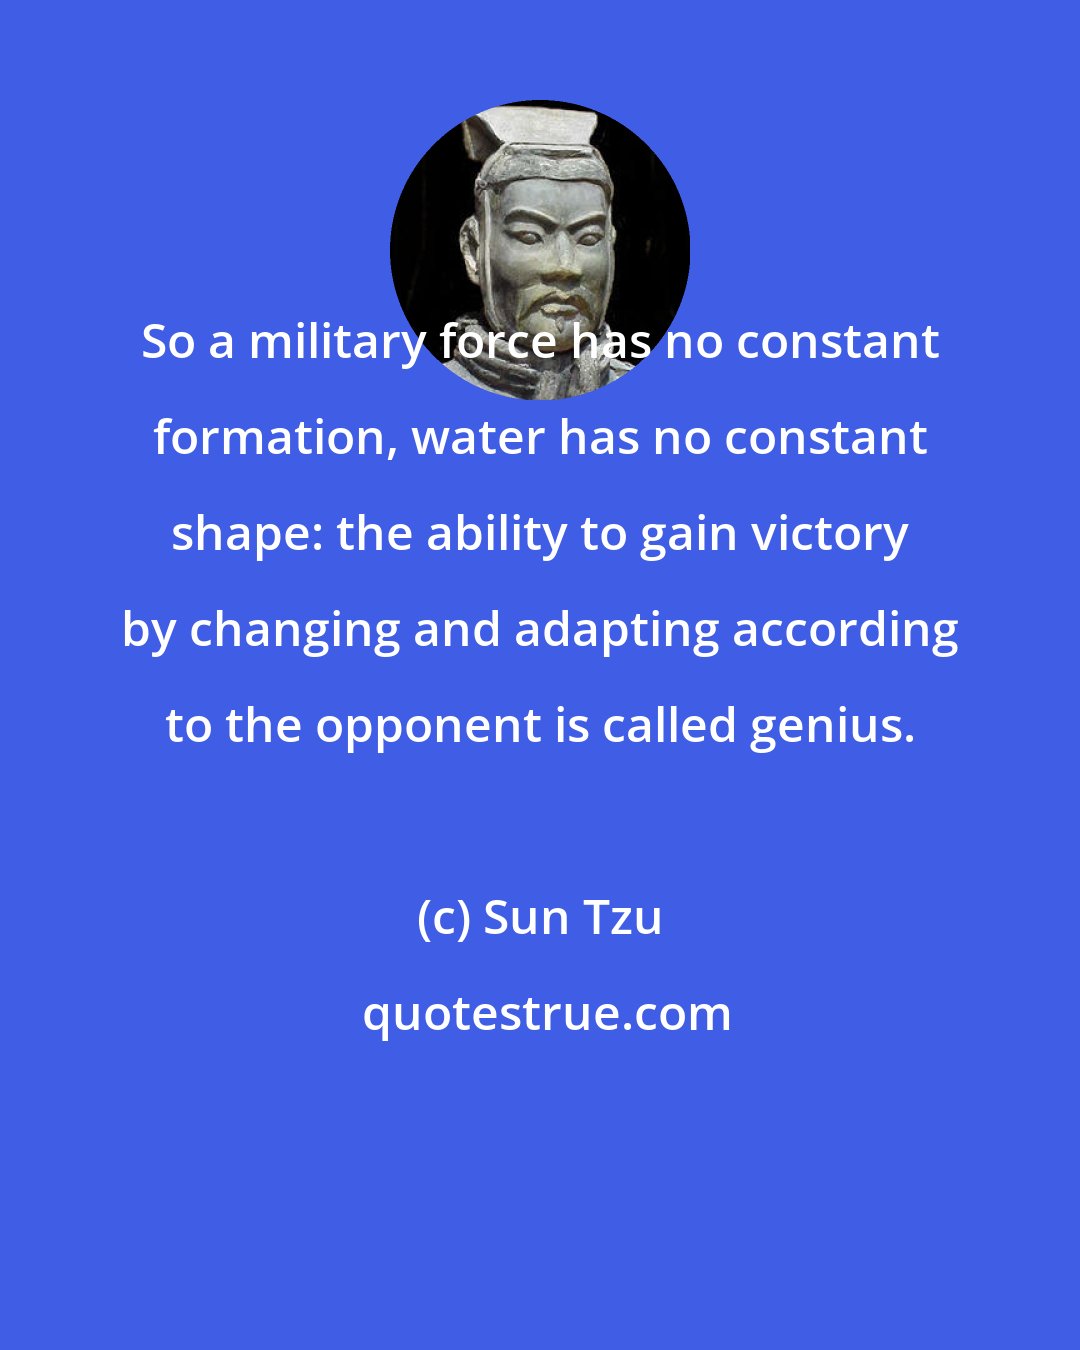 Sun Tzu: So a military force has no constant formation, water has no constant shape: the ability to gain victory by changing and adapting according to the opponent is called genius.